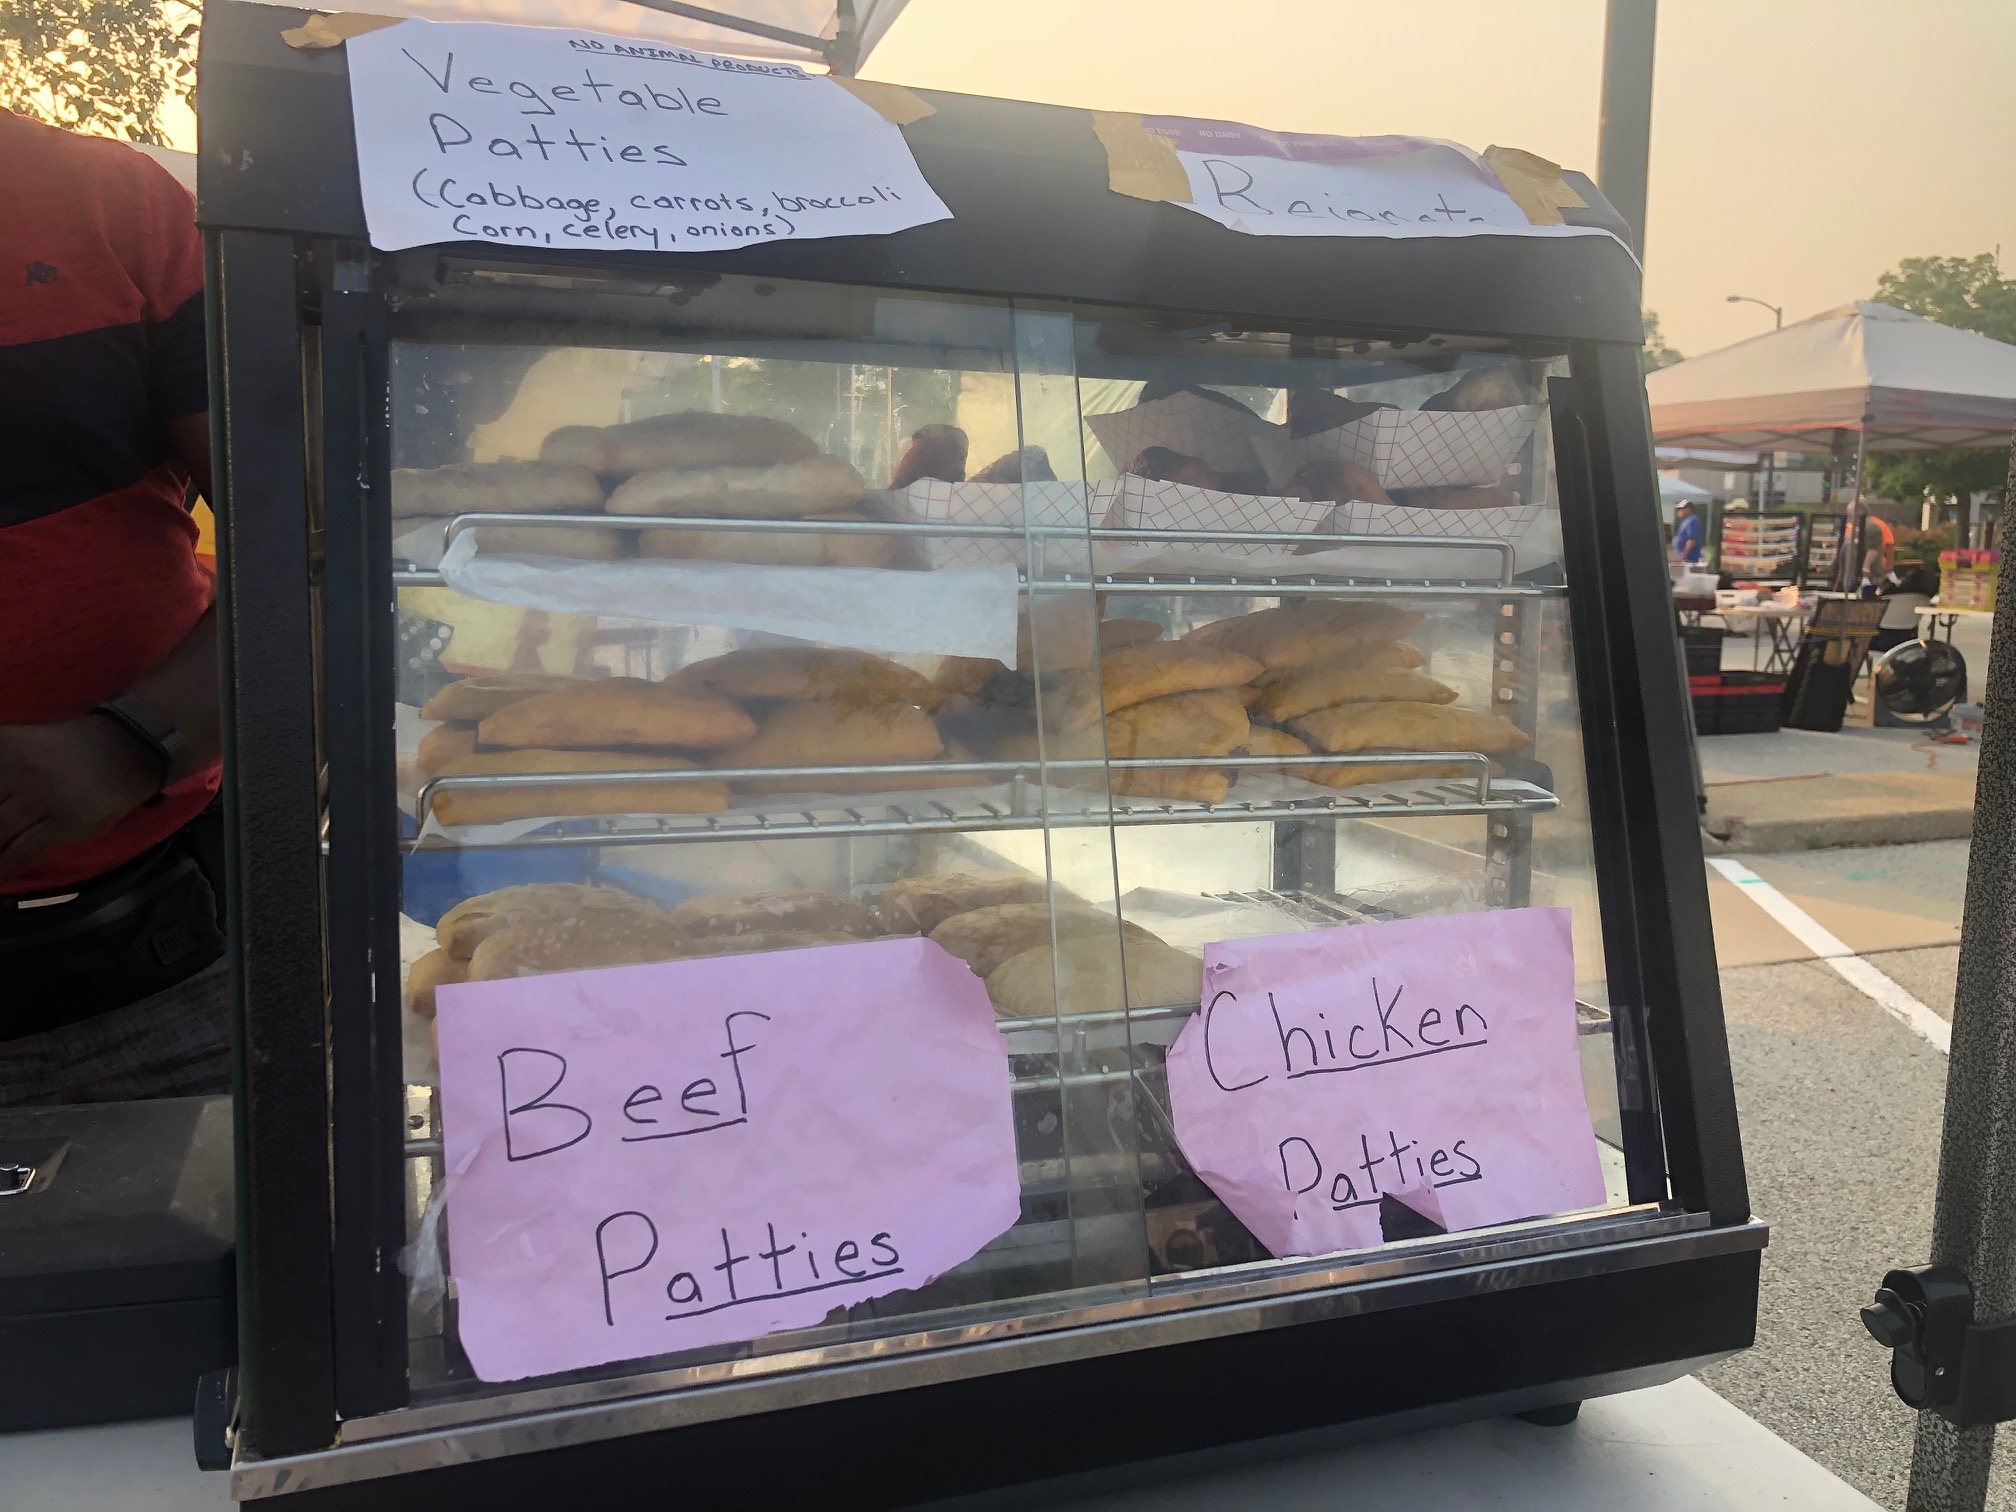 At the Urbana Market in the Square, there is a warming case of hand pies with handwritten names of the flavors of hand pie. Photo by Alyssa Buckley.